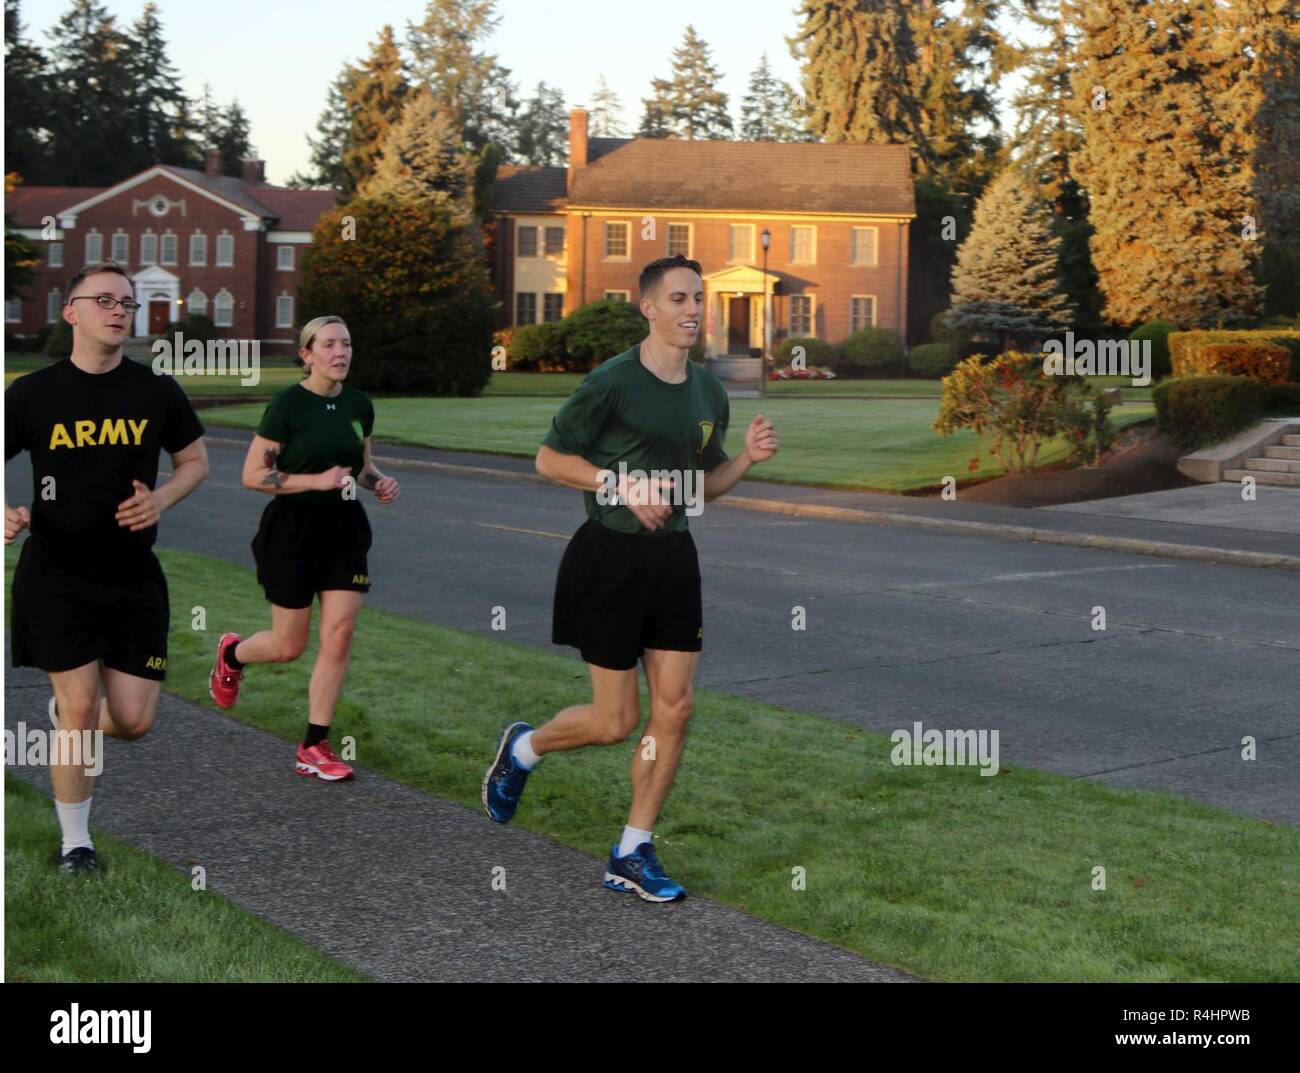 Sgt. William Ezzard, center, leads a training run with Specialists Nicholas Brown and Emma Larson on Joint Base Lewis-McChord. Ezzard, a paralegal NCO with 42nd Military Police Brigade, is one of three brigade Soldiers who will represent Joint Base Lewis-McChord at the Army Ten Miler race in Washington, D.C. Stock Photo